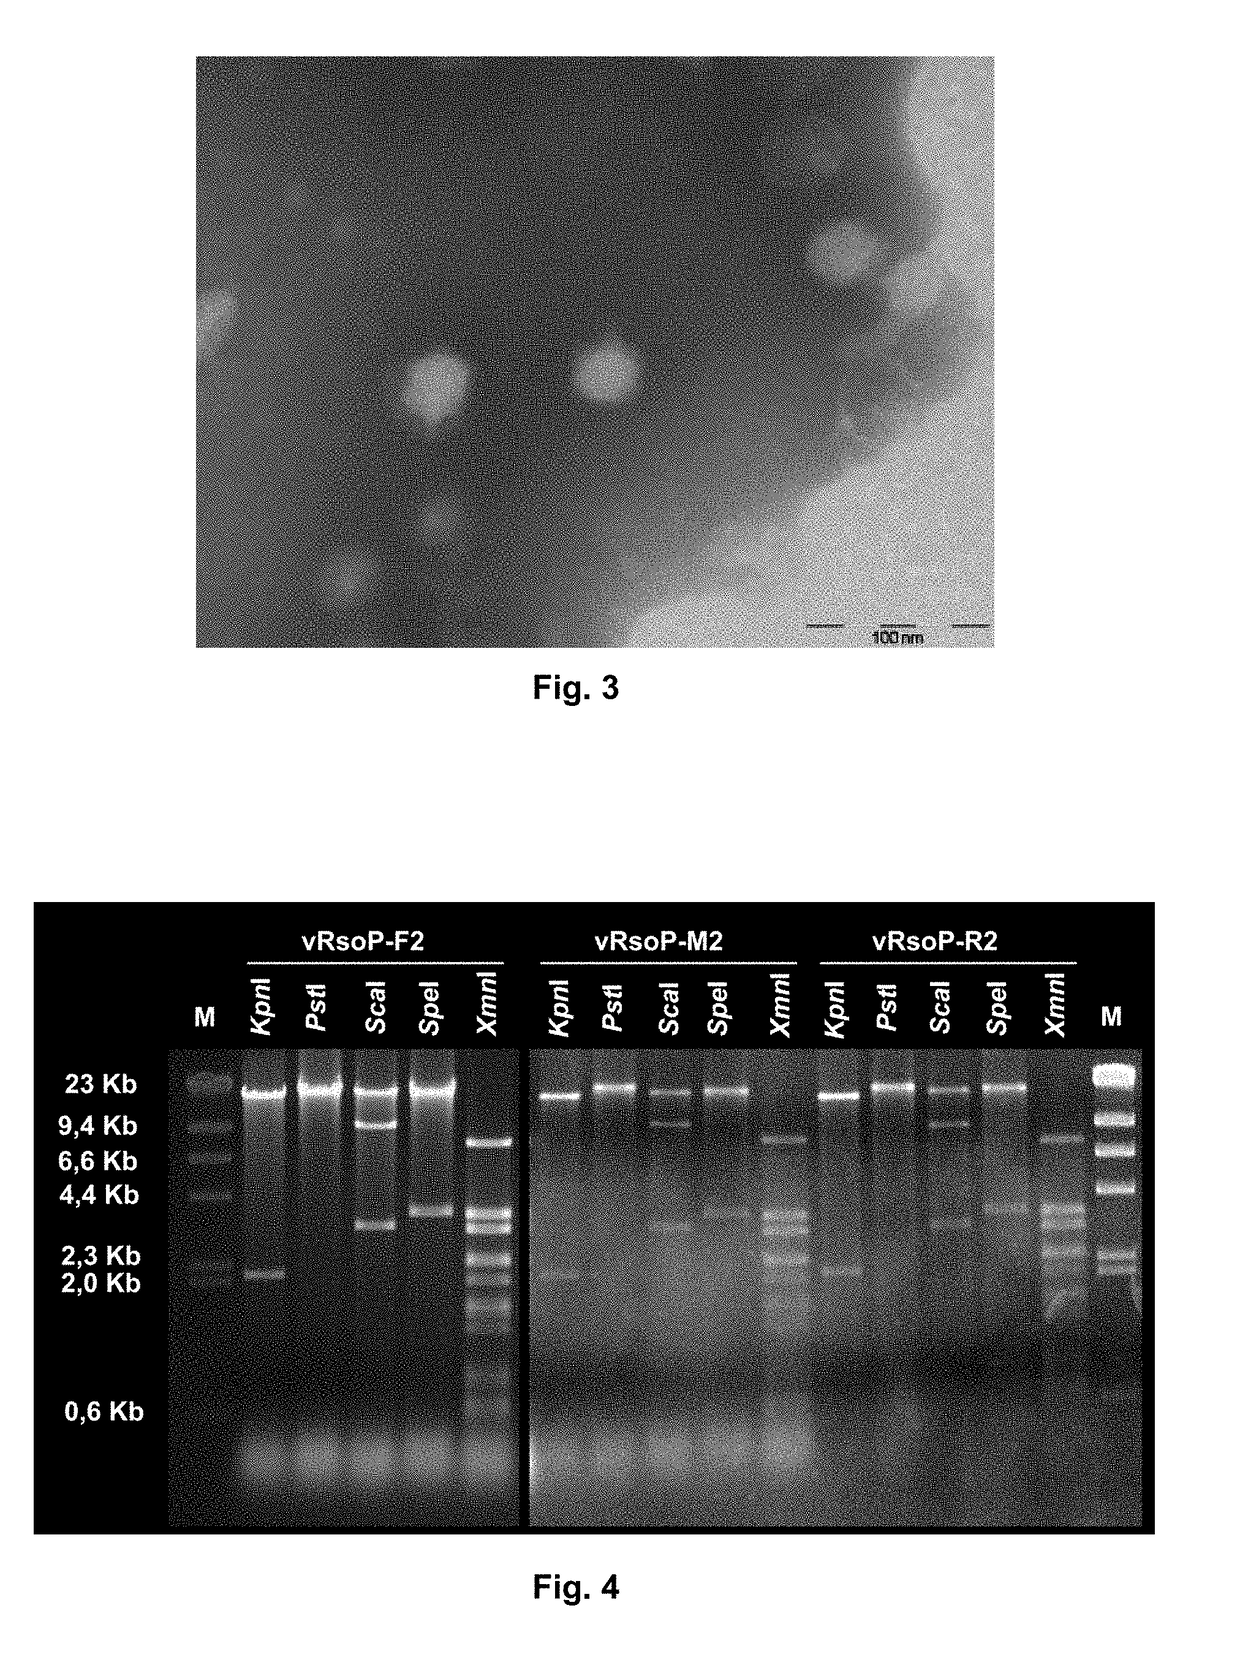 Method for the prevention and/or the biological control of bacterial wilt caused by ralstonia solanacearum, via the use of bacteriophages suitable for this purpose and compositions thereof